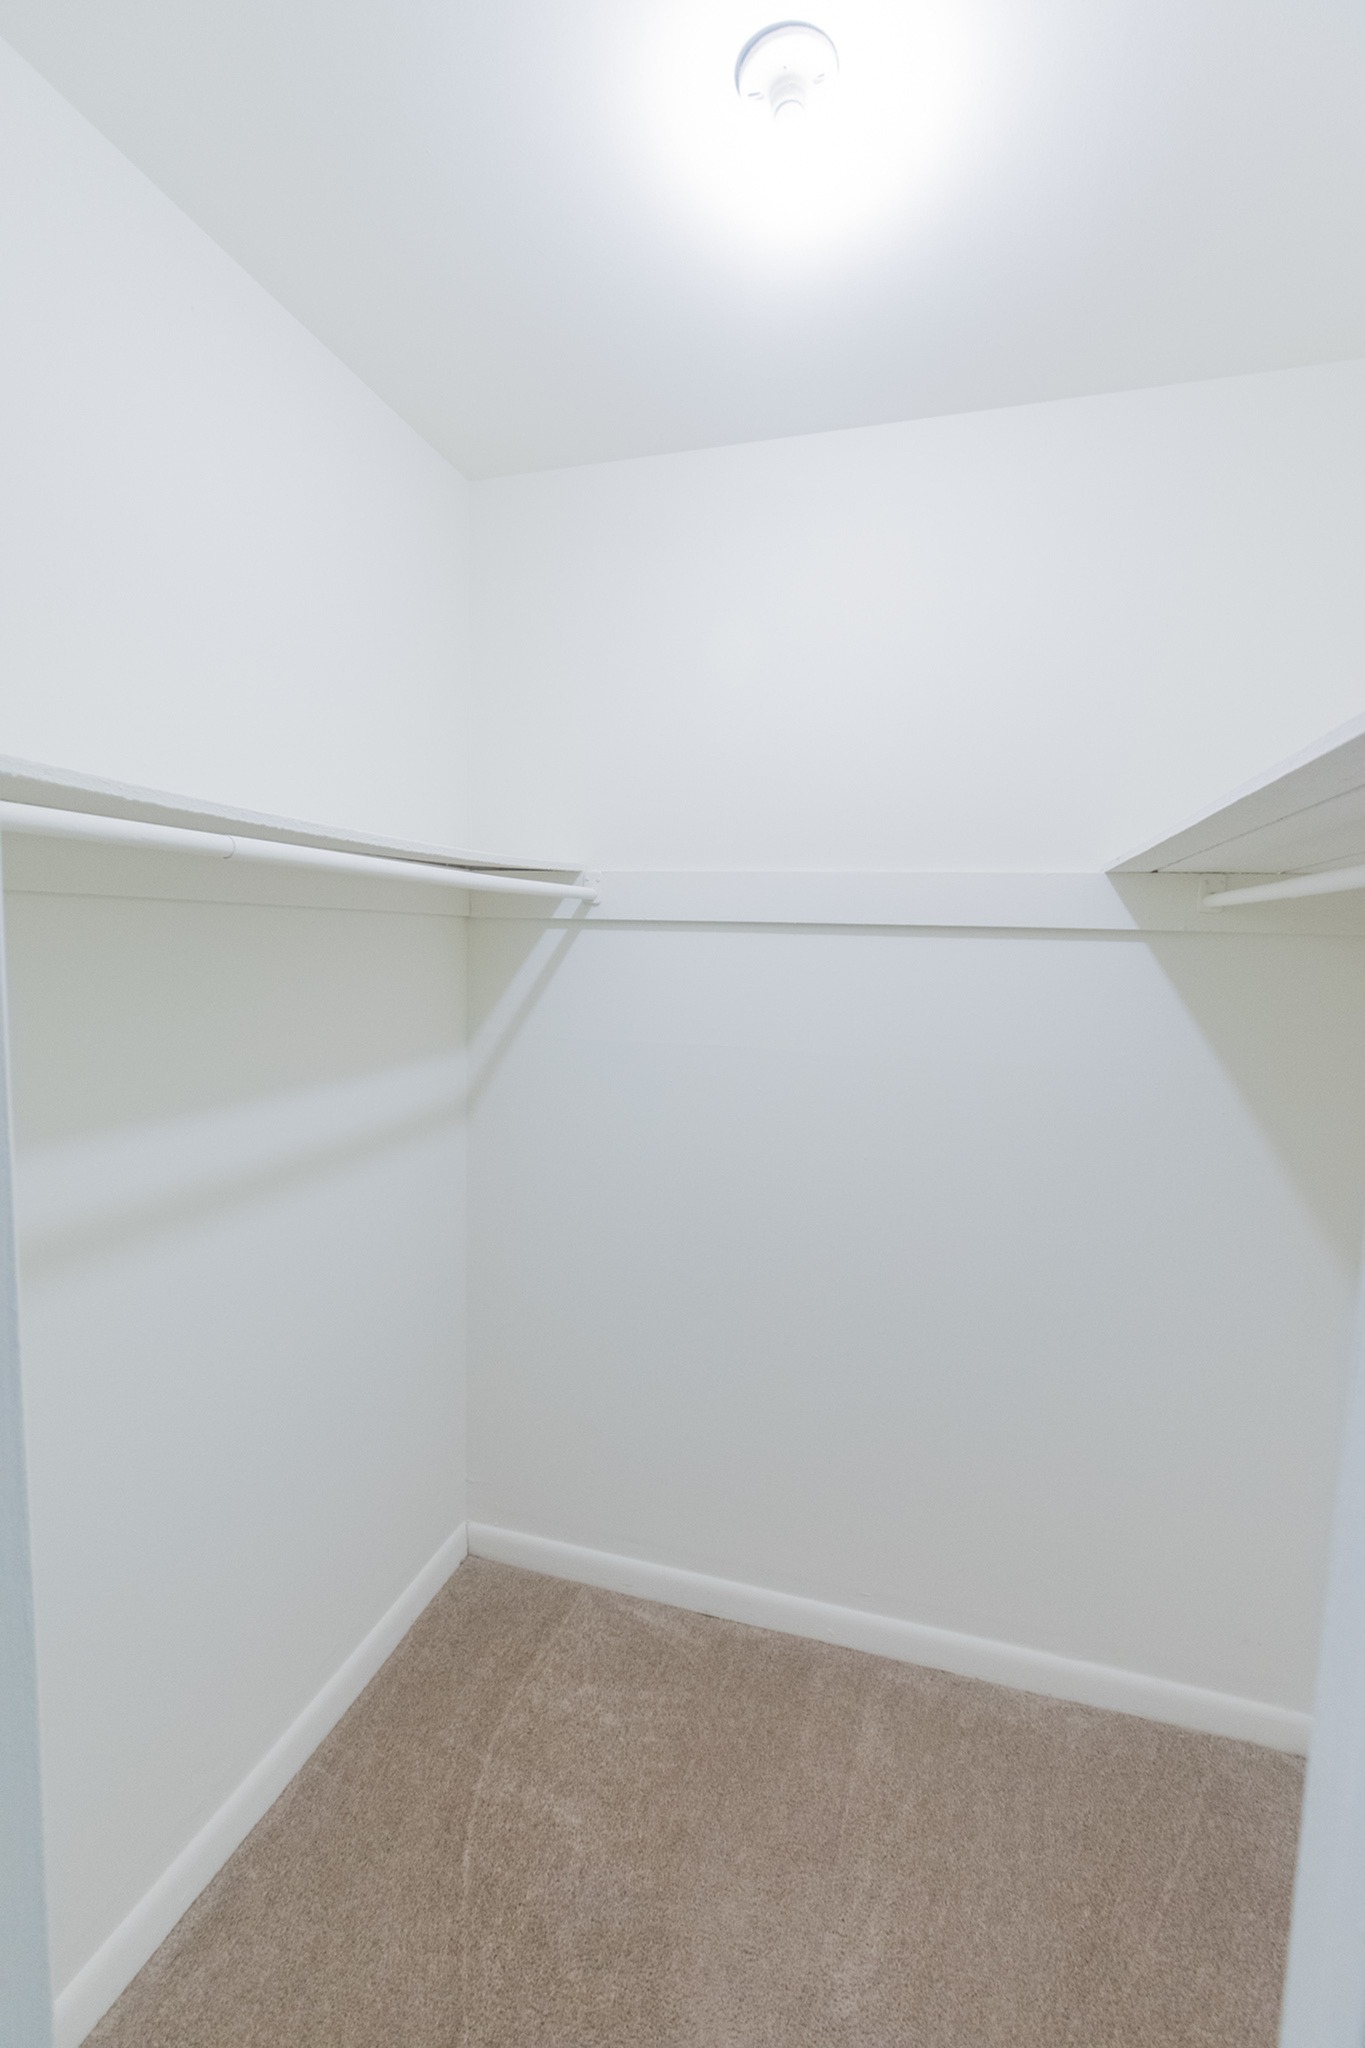 Walk in closet area of an apartment fitted with carpet flooring, shelves, and a high ceiling